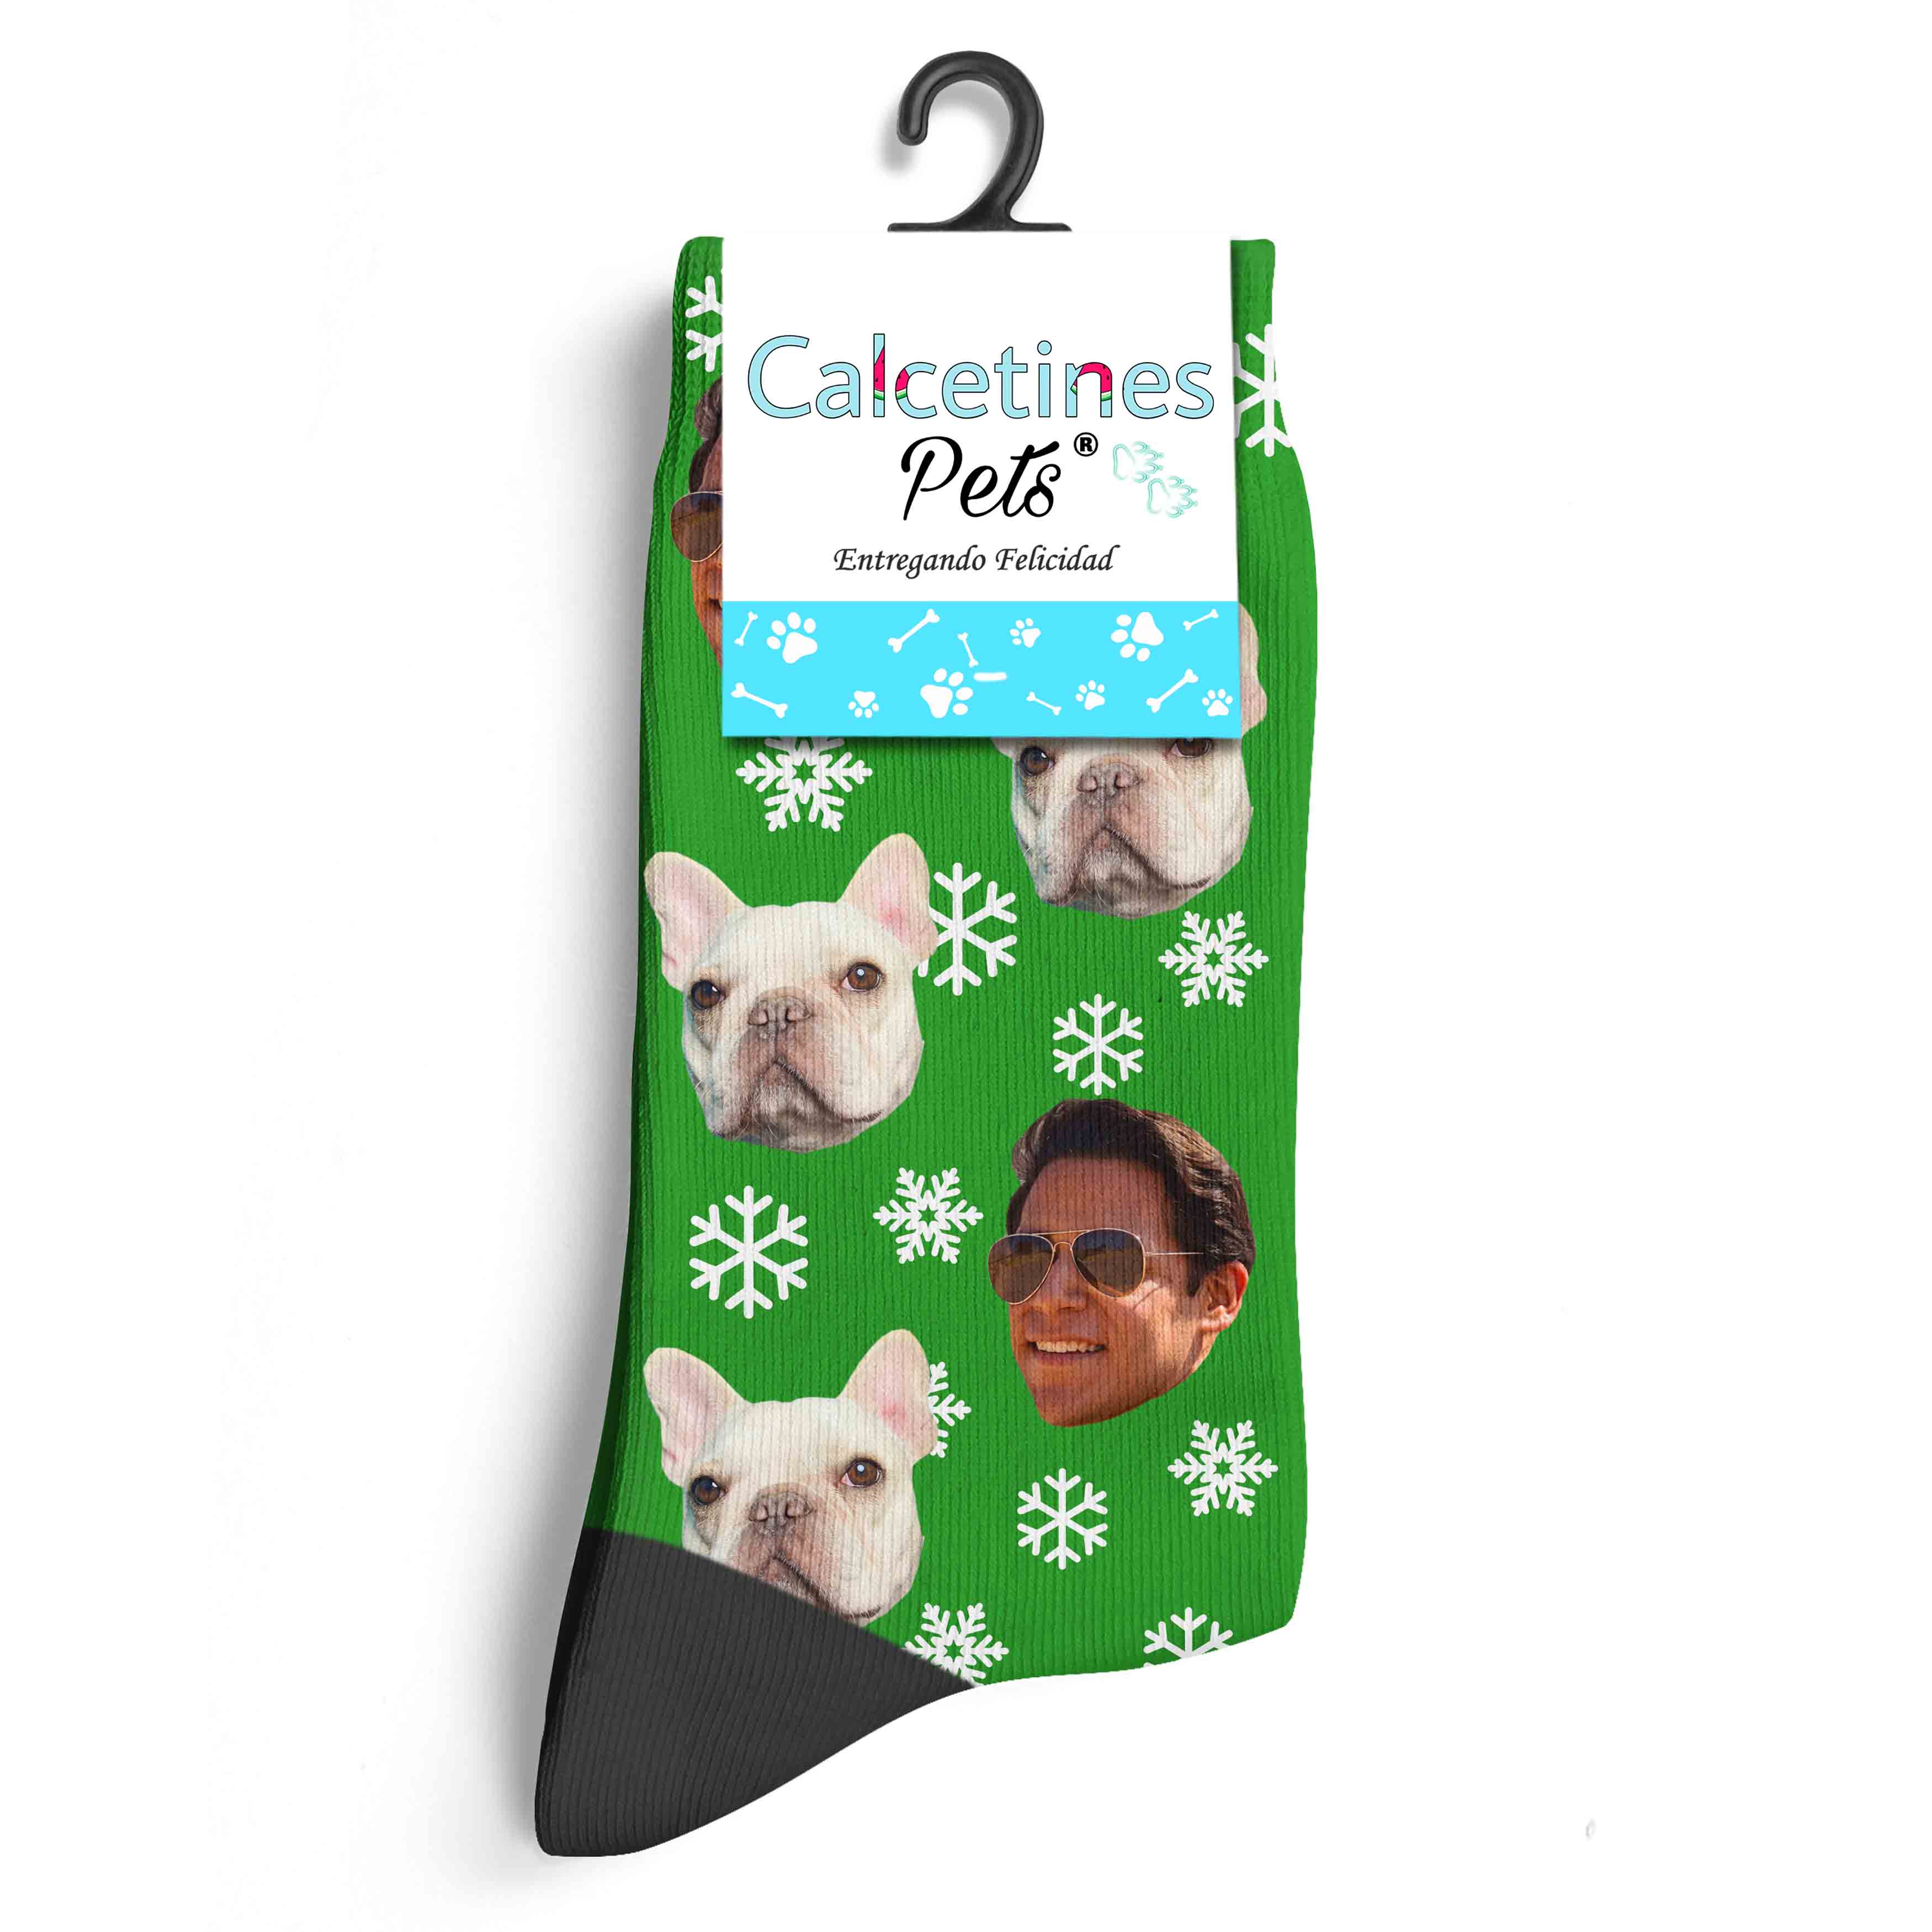 Calcetines Pets